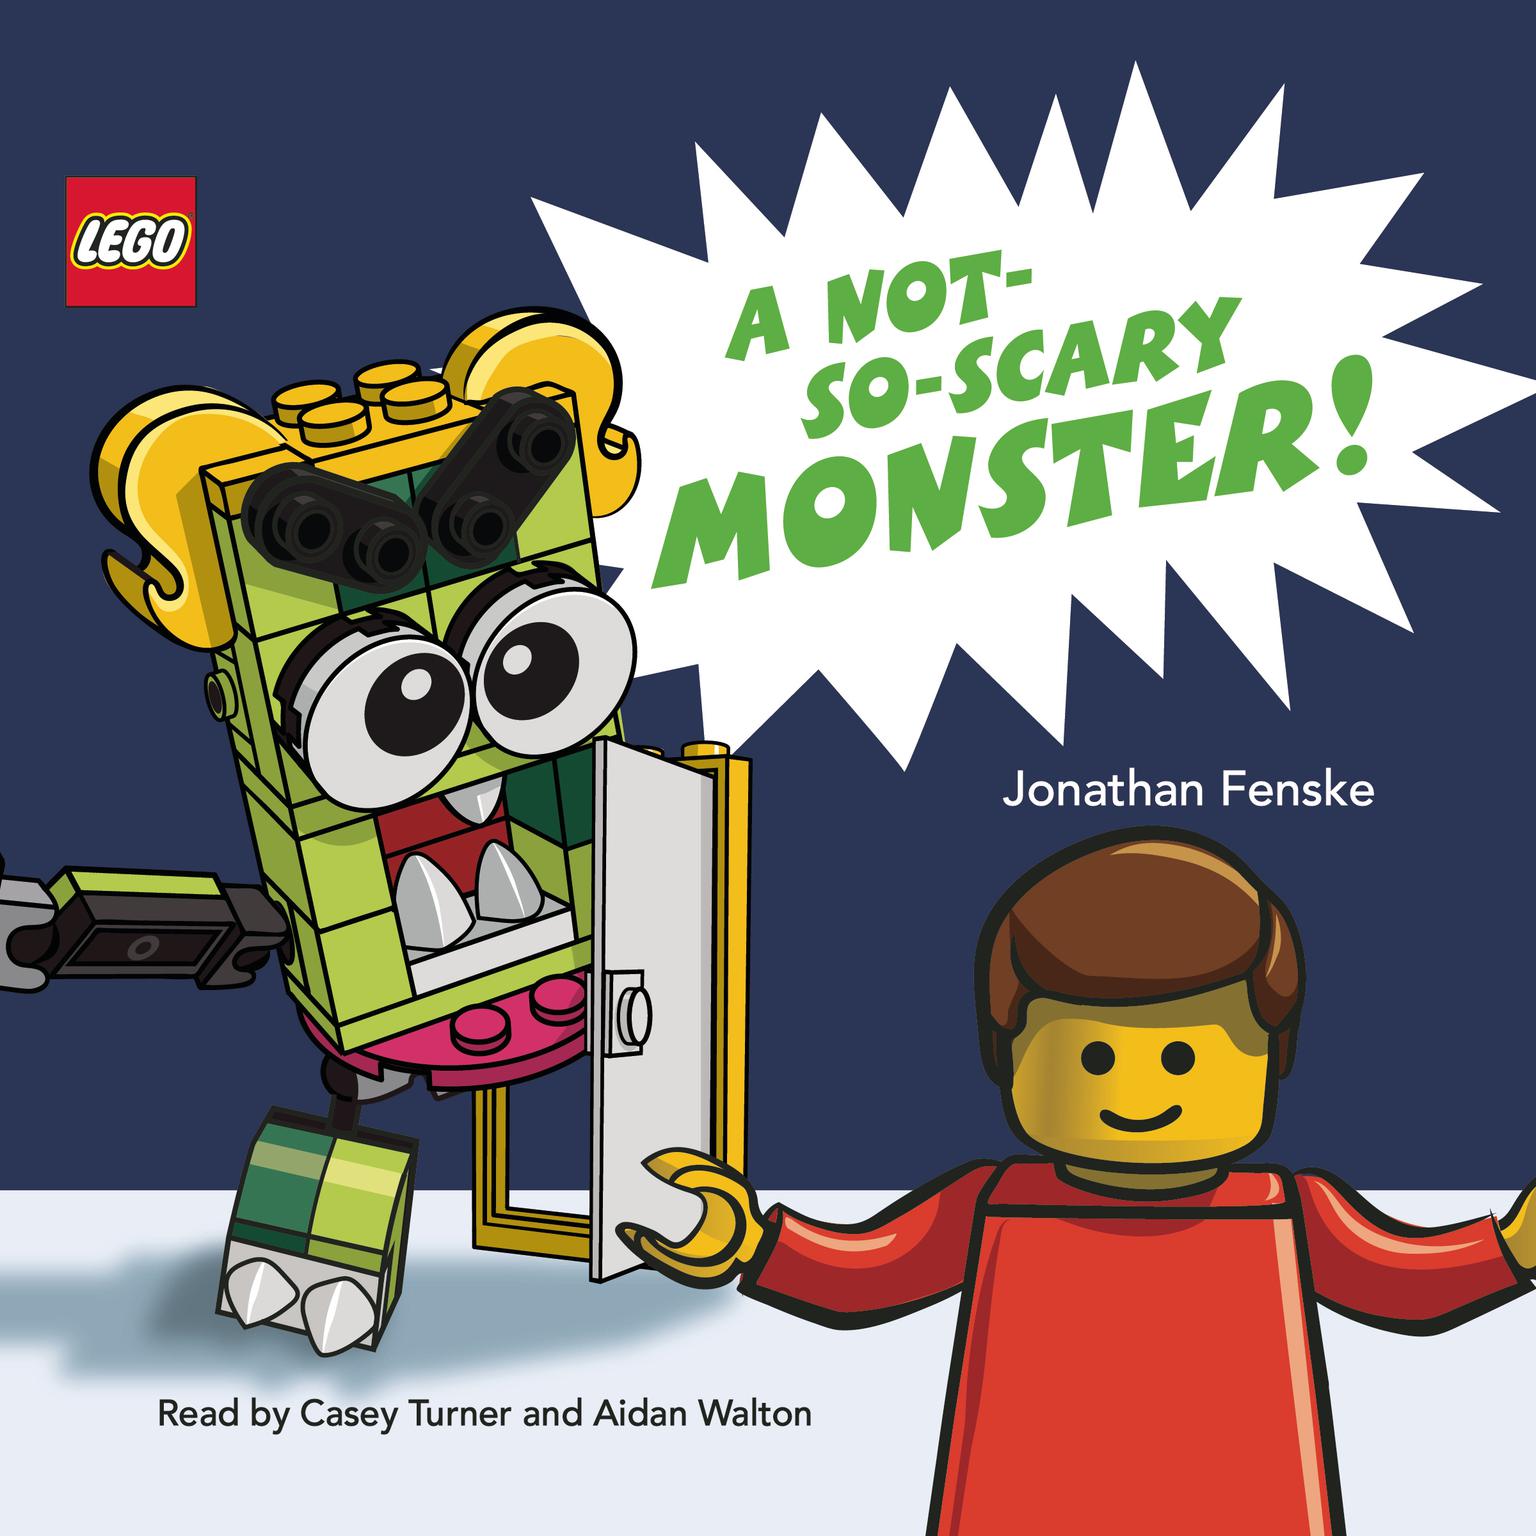 A Not-So-Scary Monster! (A LEGO Picture Book) Audiobook, by Jonathan Fenske